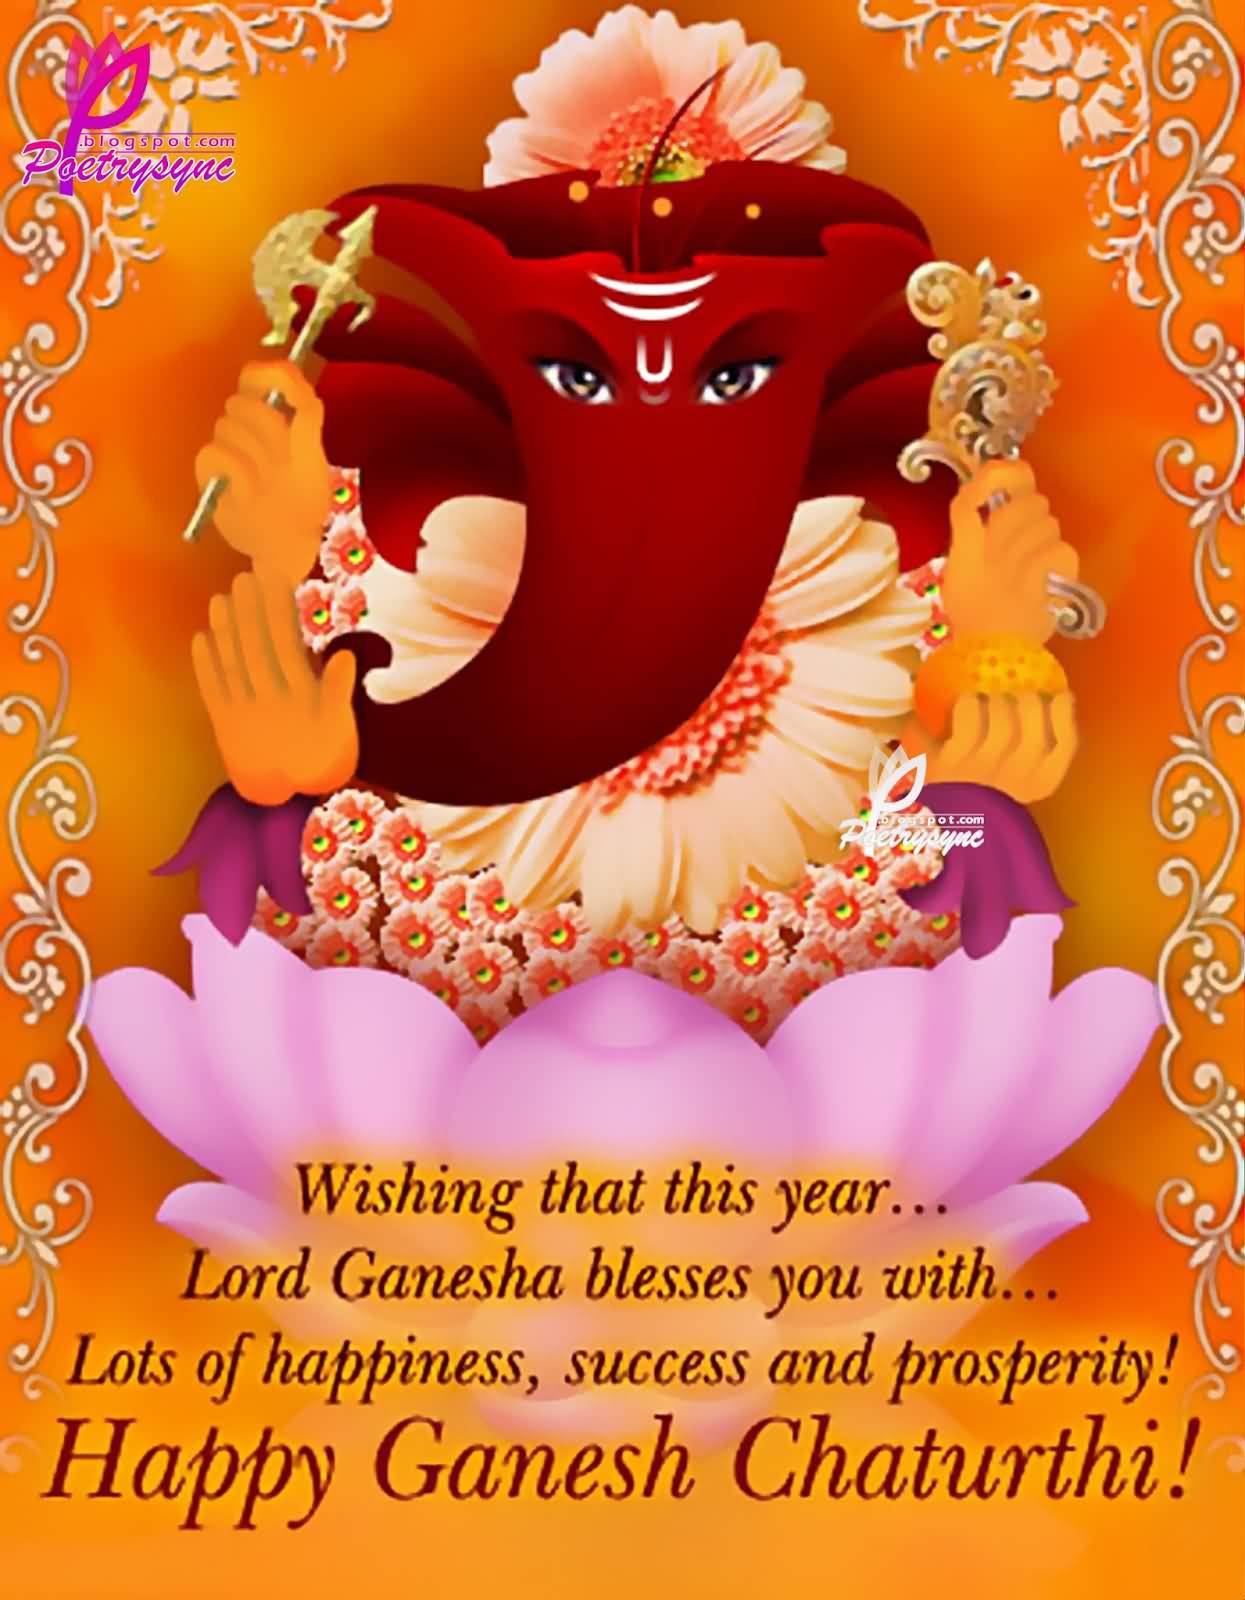 Wishing That This Year Lord Ganesha Blesses You With Lots Of Happiness, Success And Prosperity Happy Ganesh Chaturthi Card